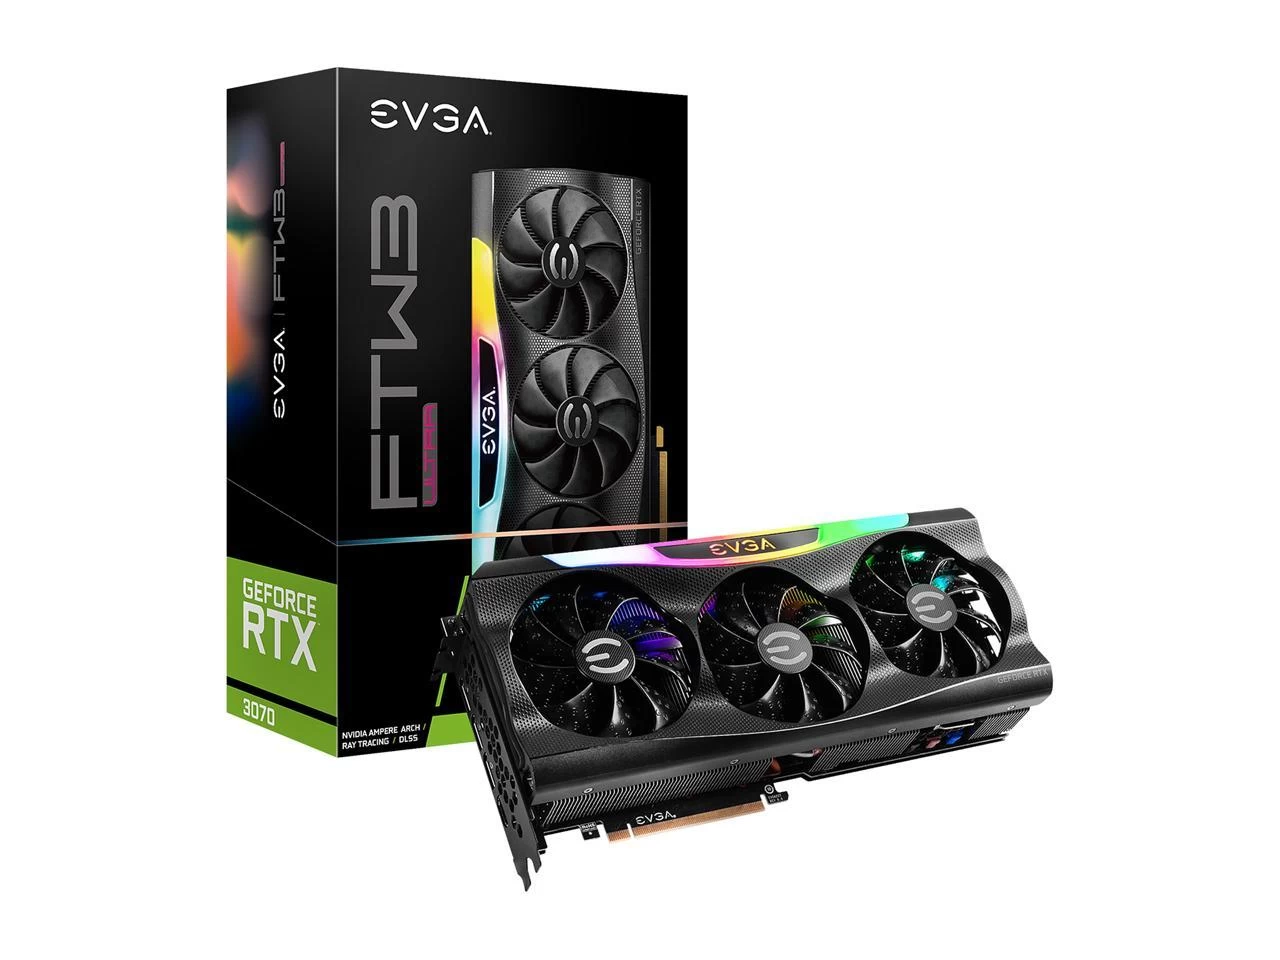 EVGA GeForce RTX 3070 FTW3 ULTRA GAMING Package